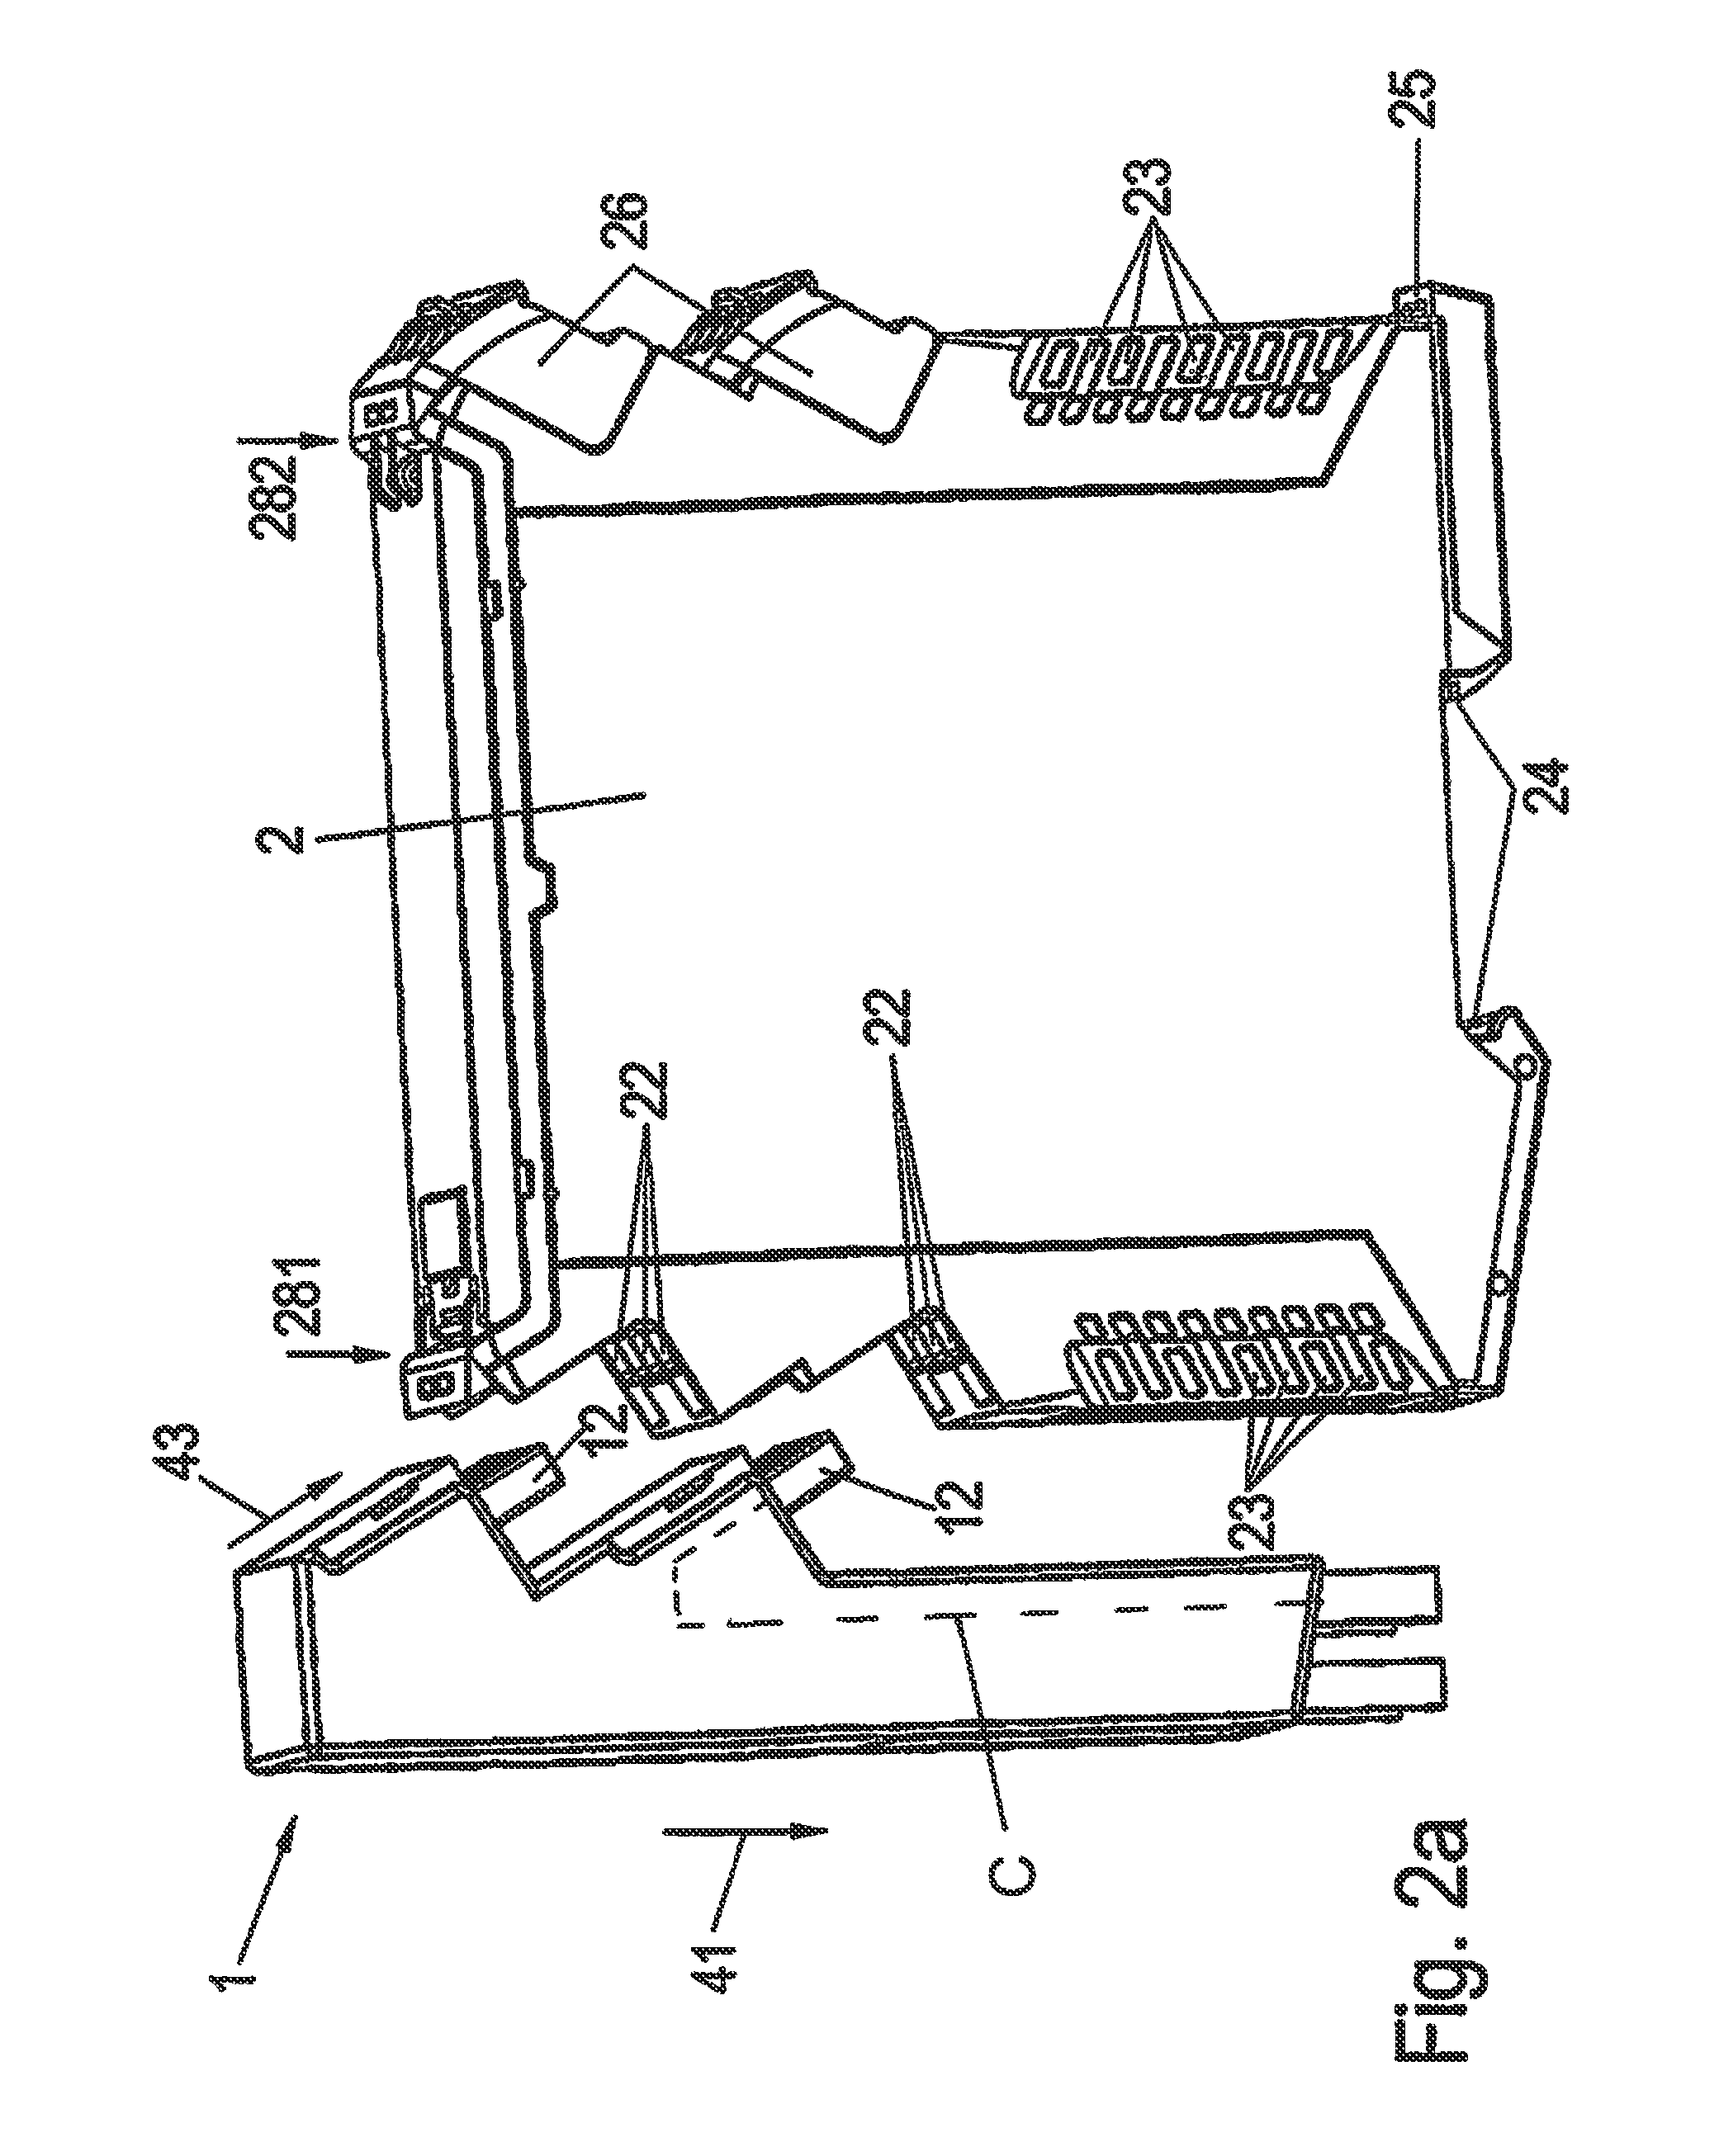 Attachment having a module and an electronics atachment